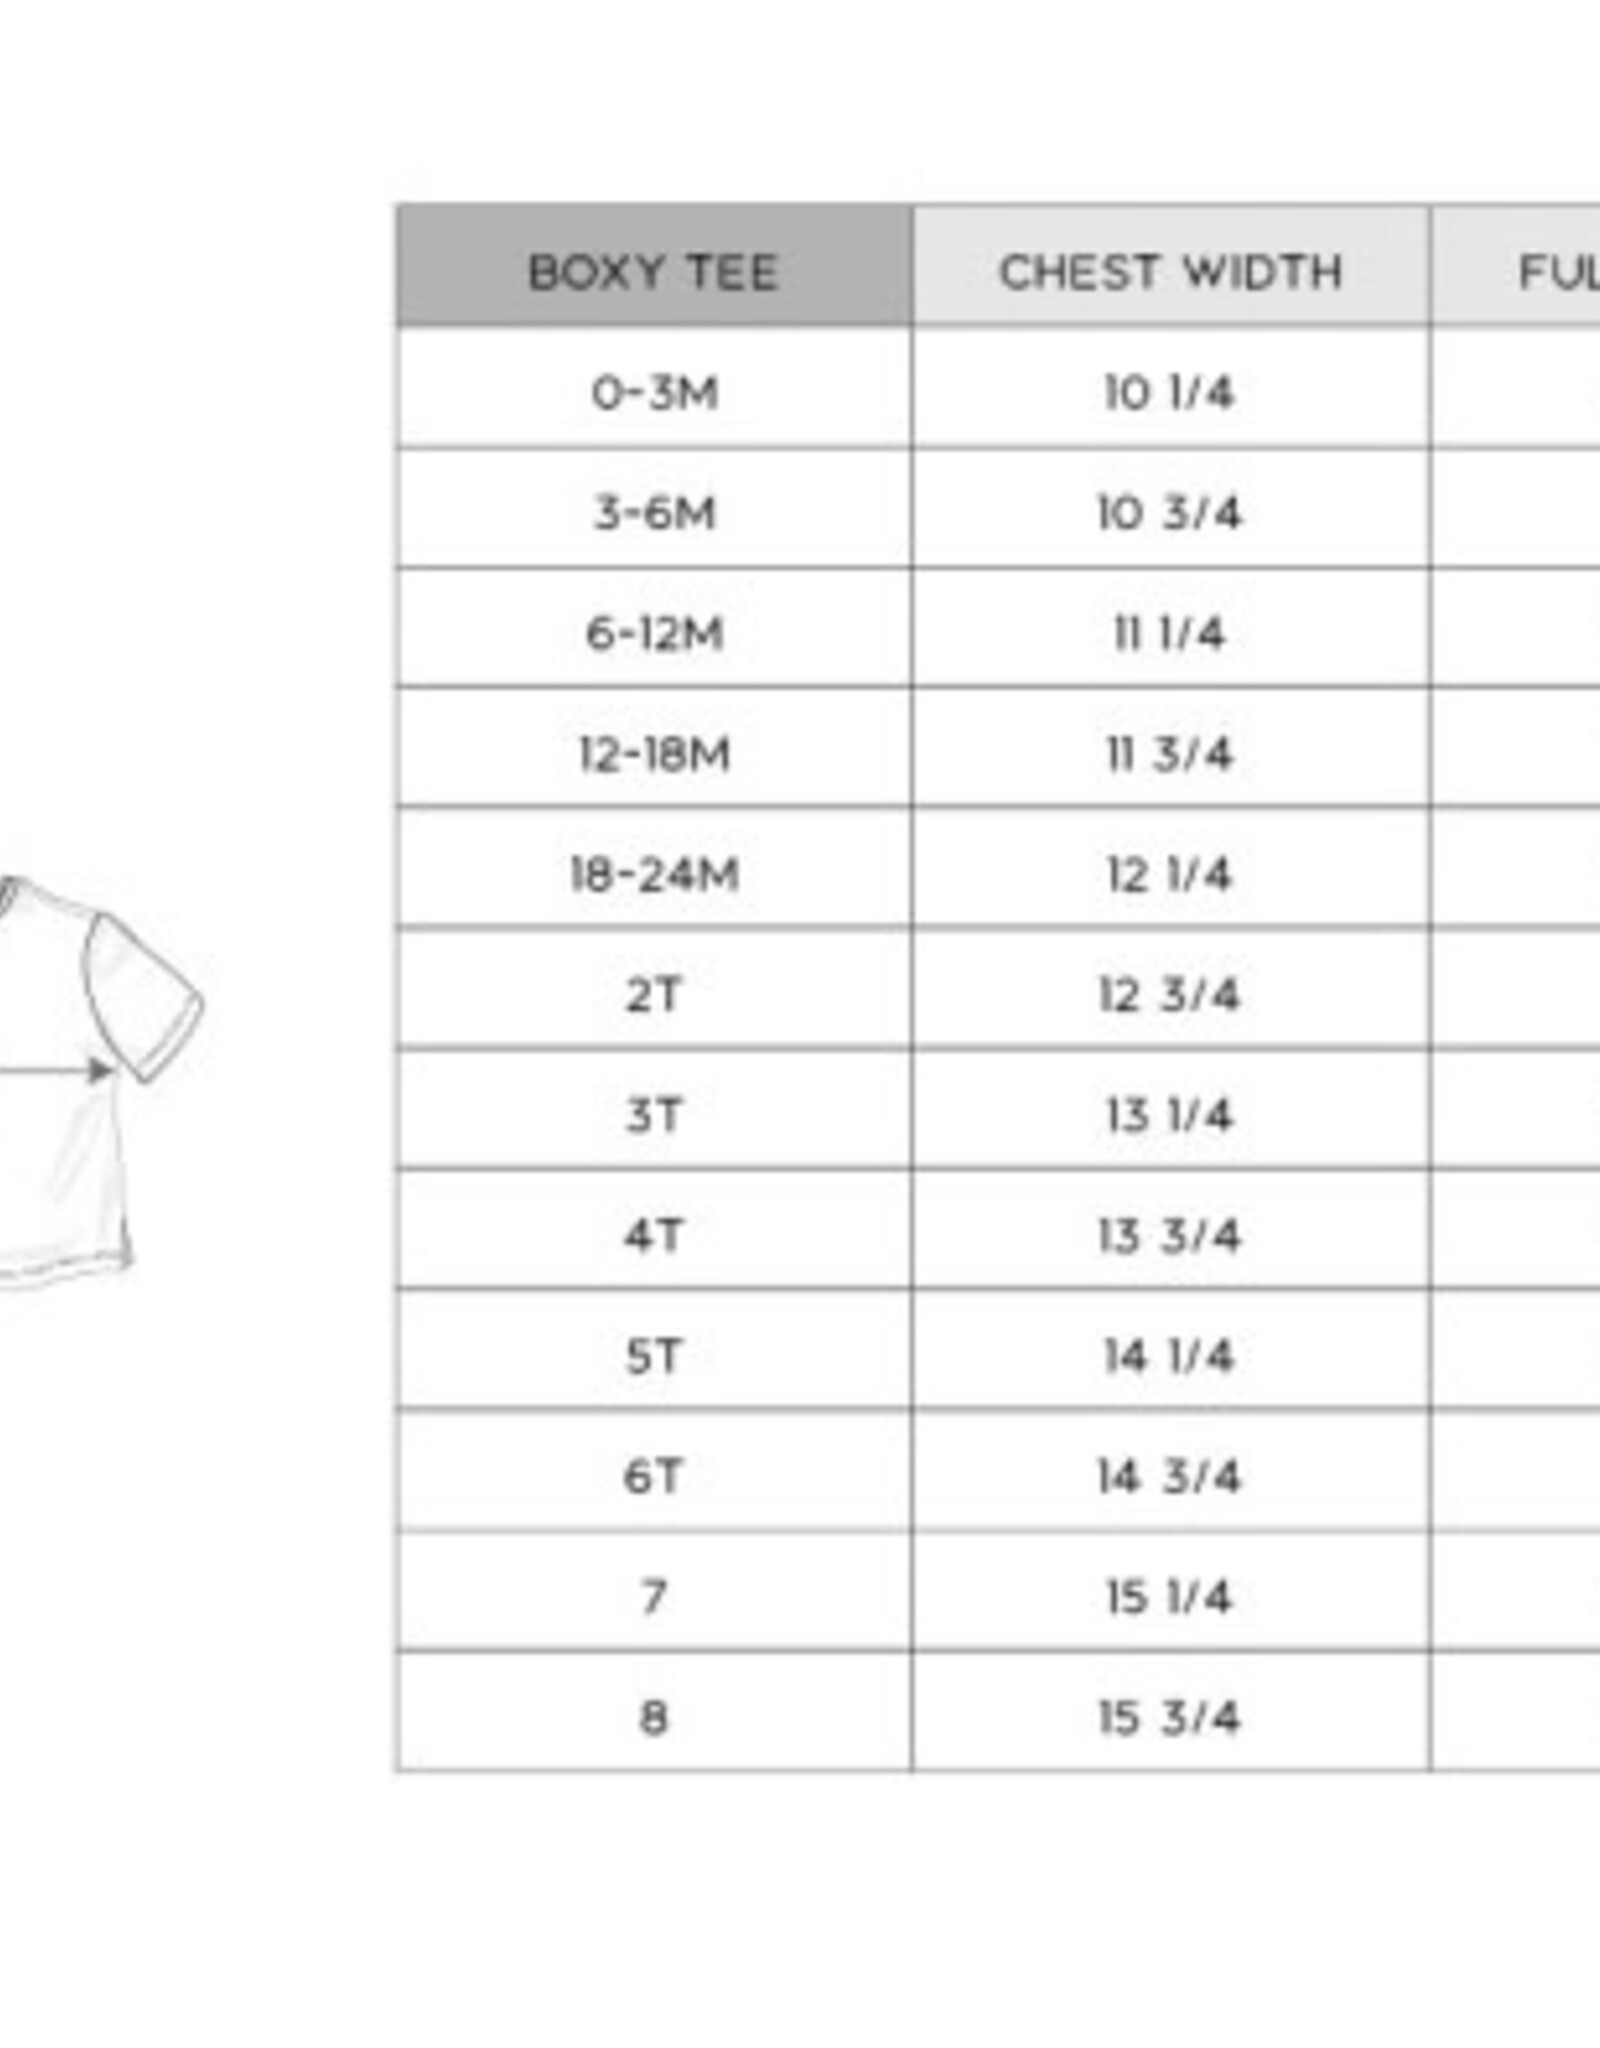 Babysprouts BOXY TEE